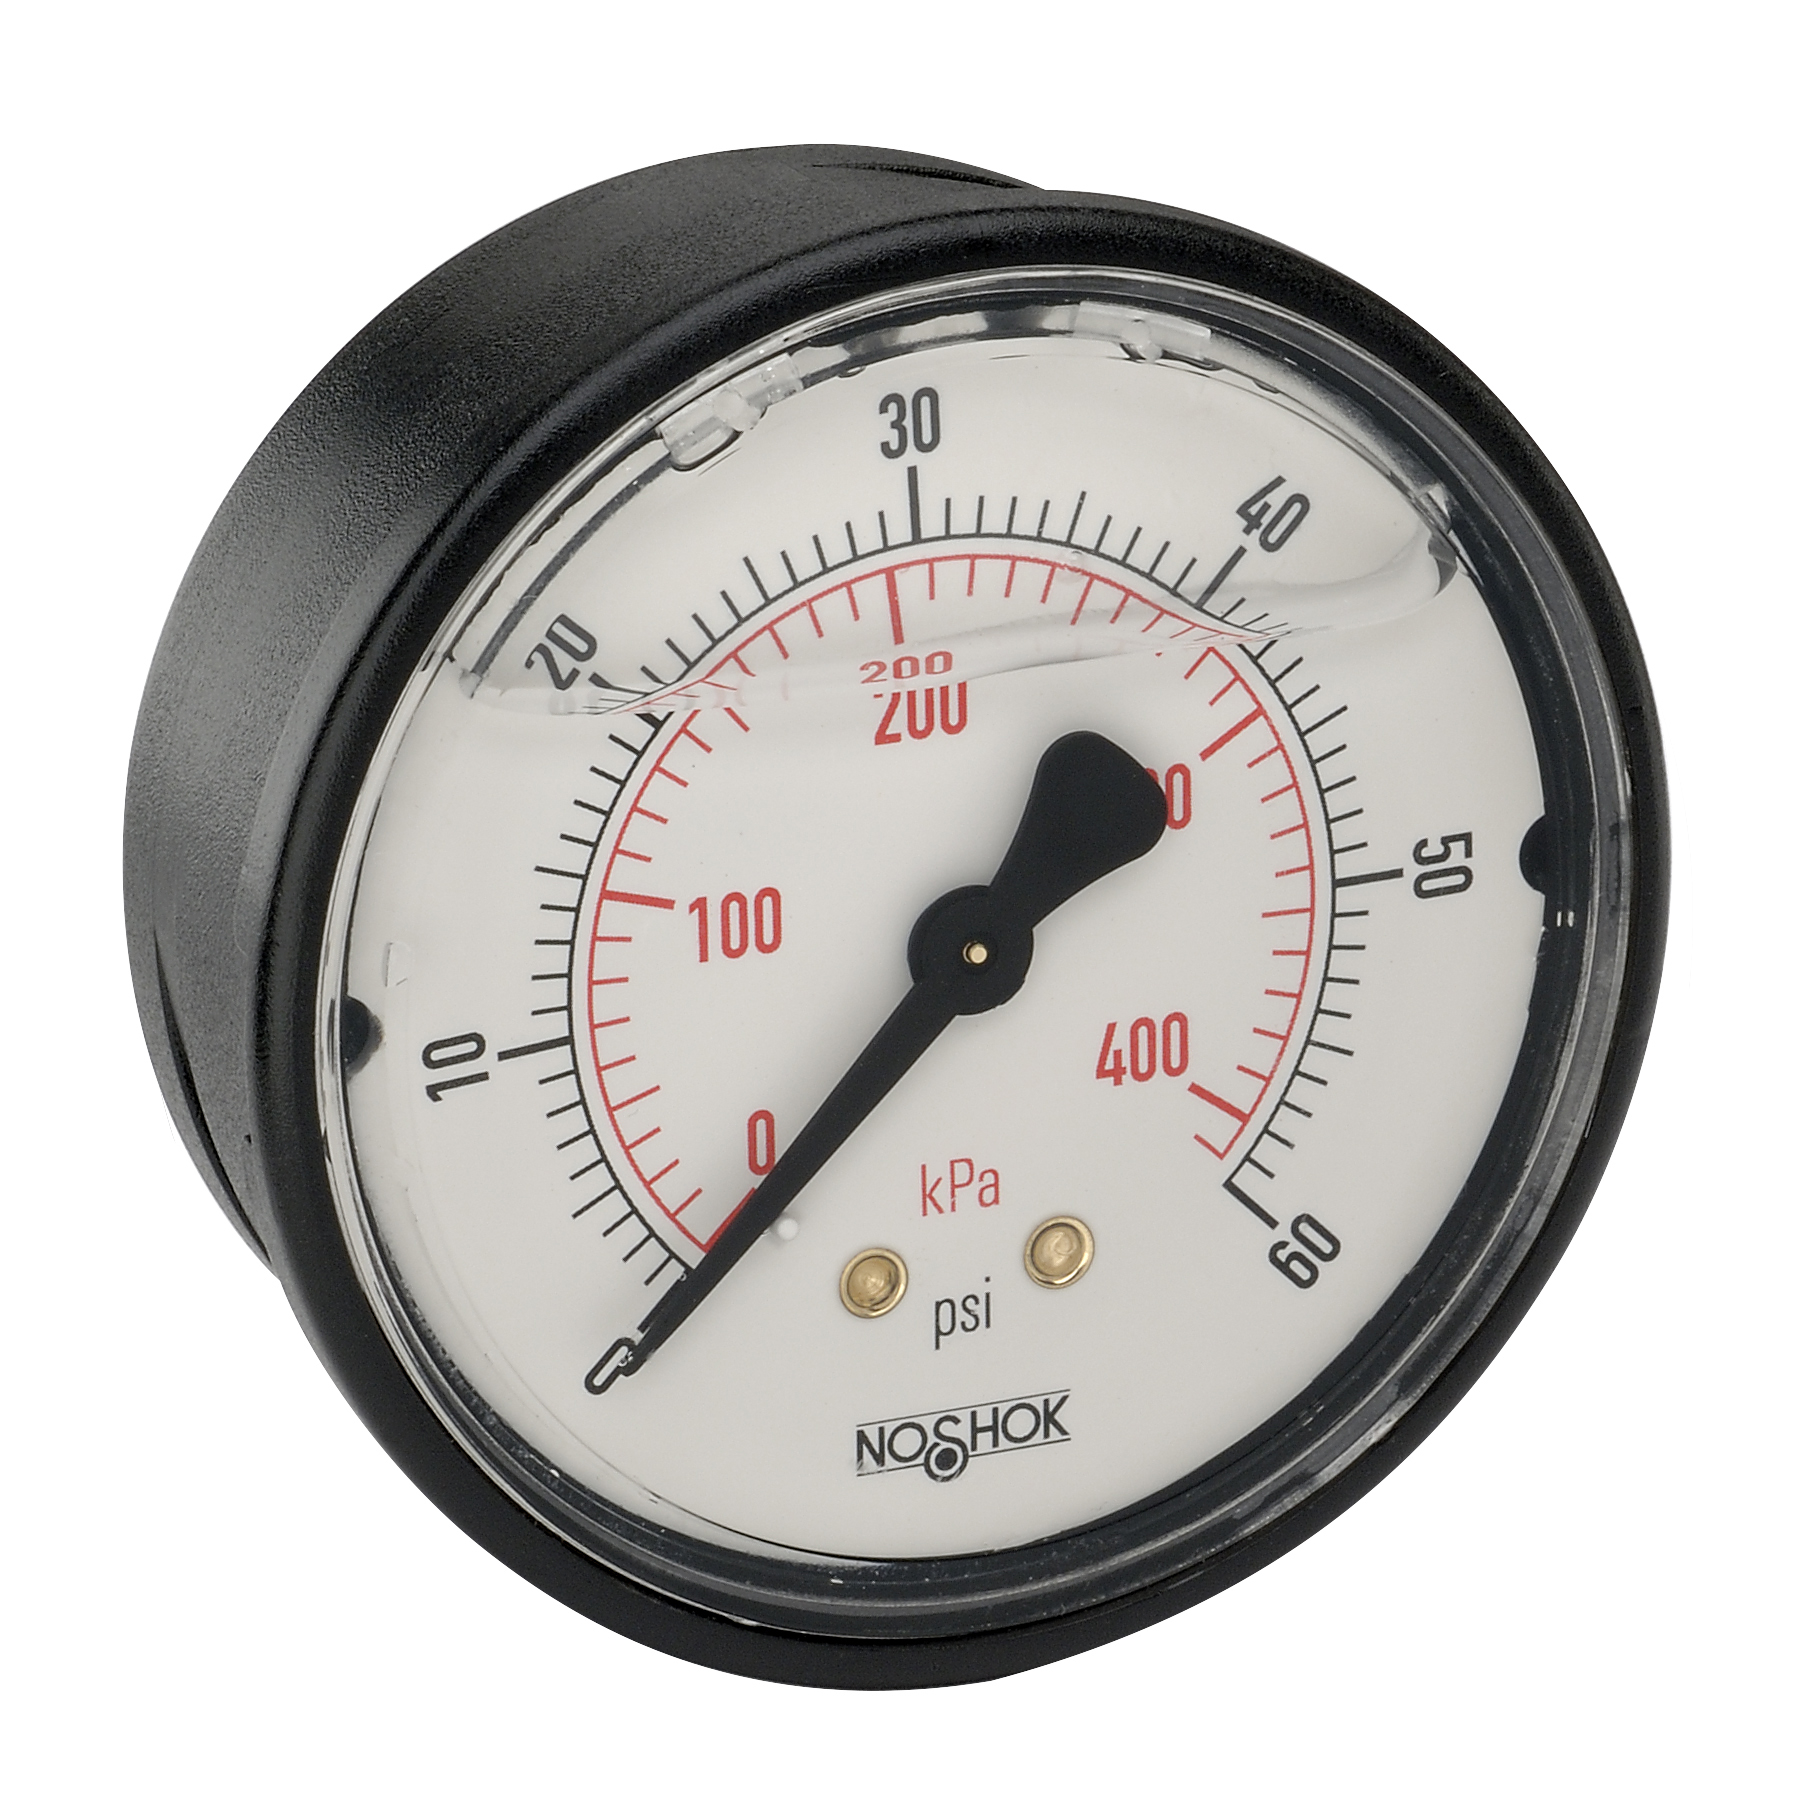 25-910-100-psi/kPa-PMC 900 Series ABS and Stainless Steel Liquid Filled Pressure Gauges